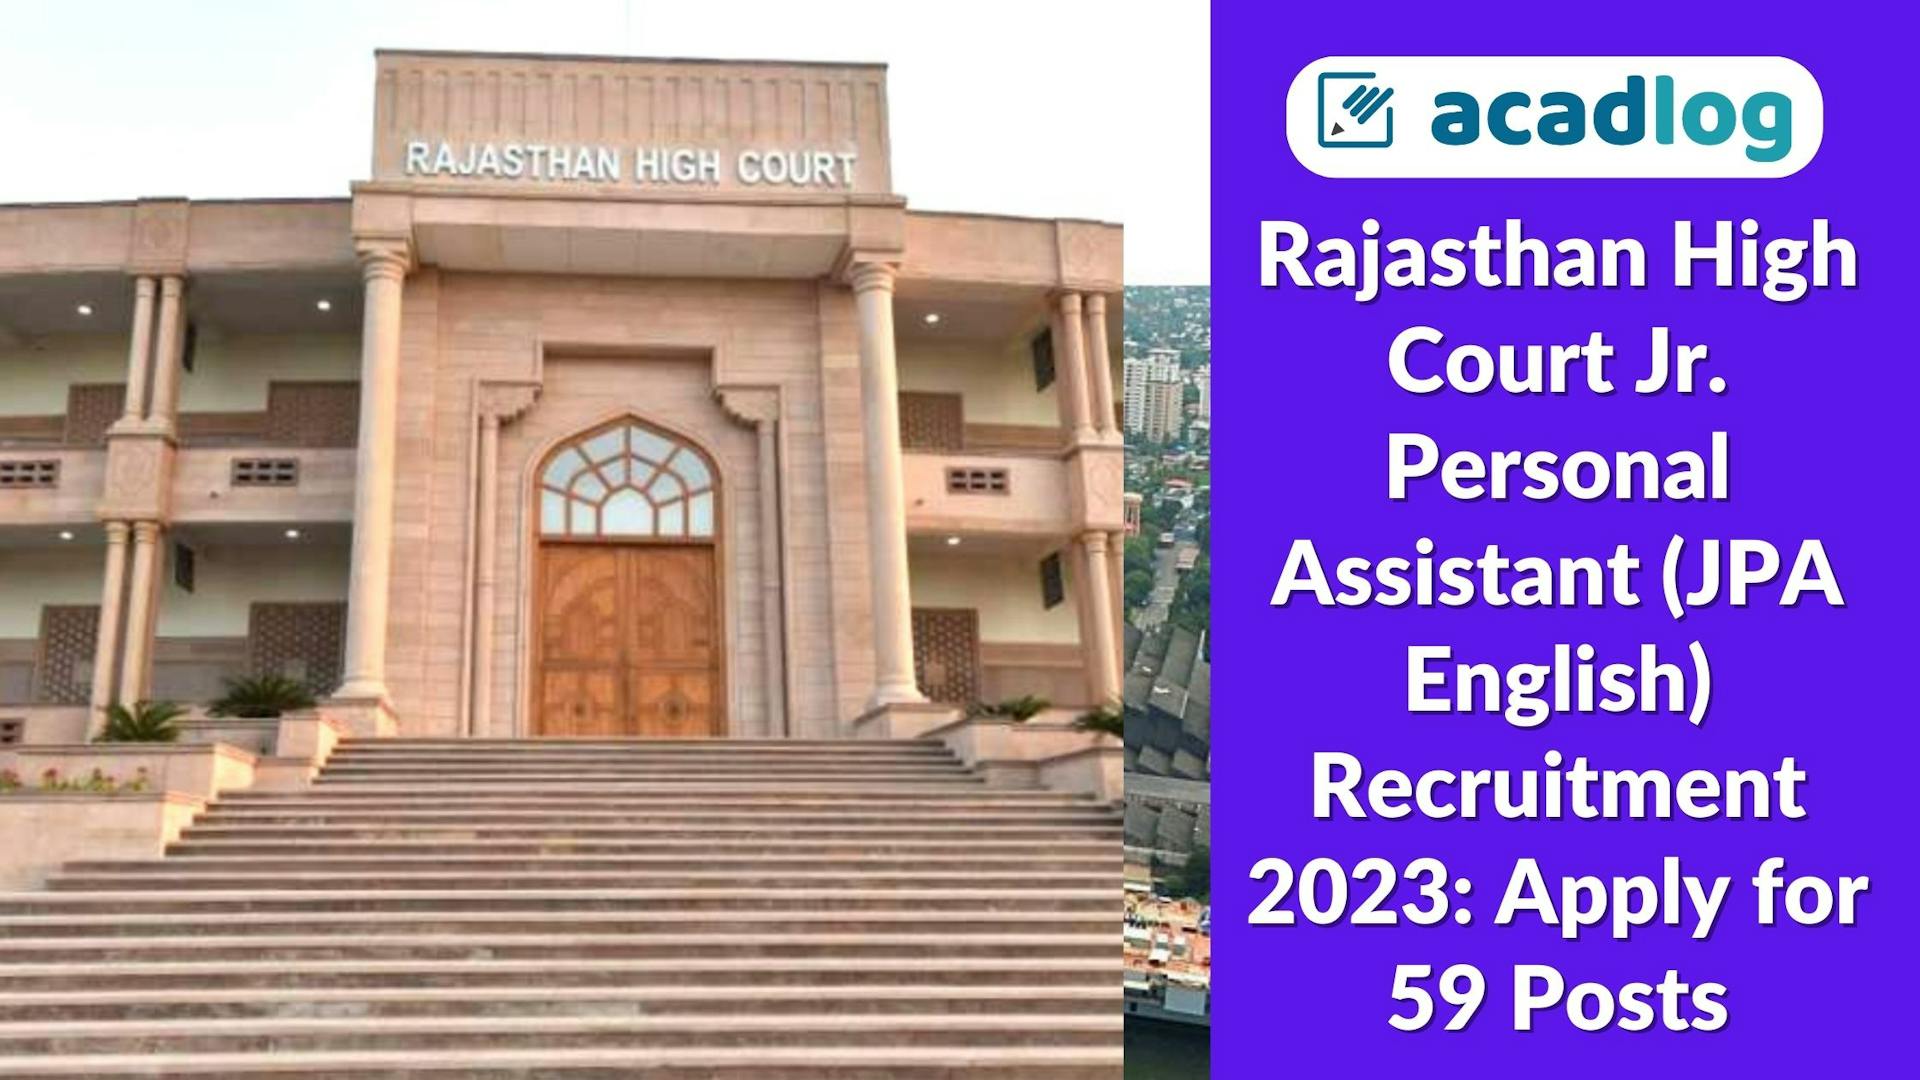 Rajasthan High Court Jr. Personal Assistant(JPA English) Recruitment 2023: Apply for 59 Posts